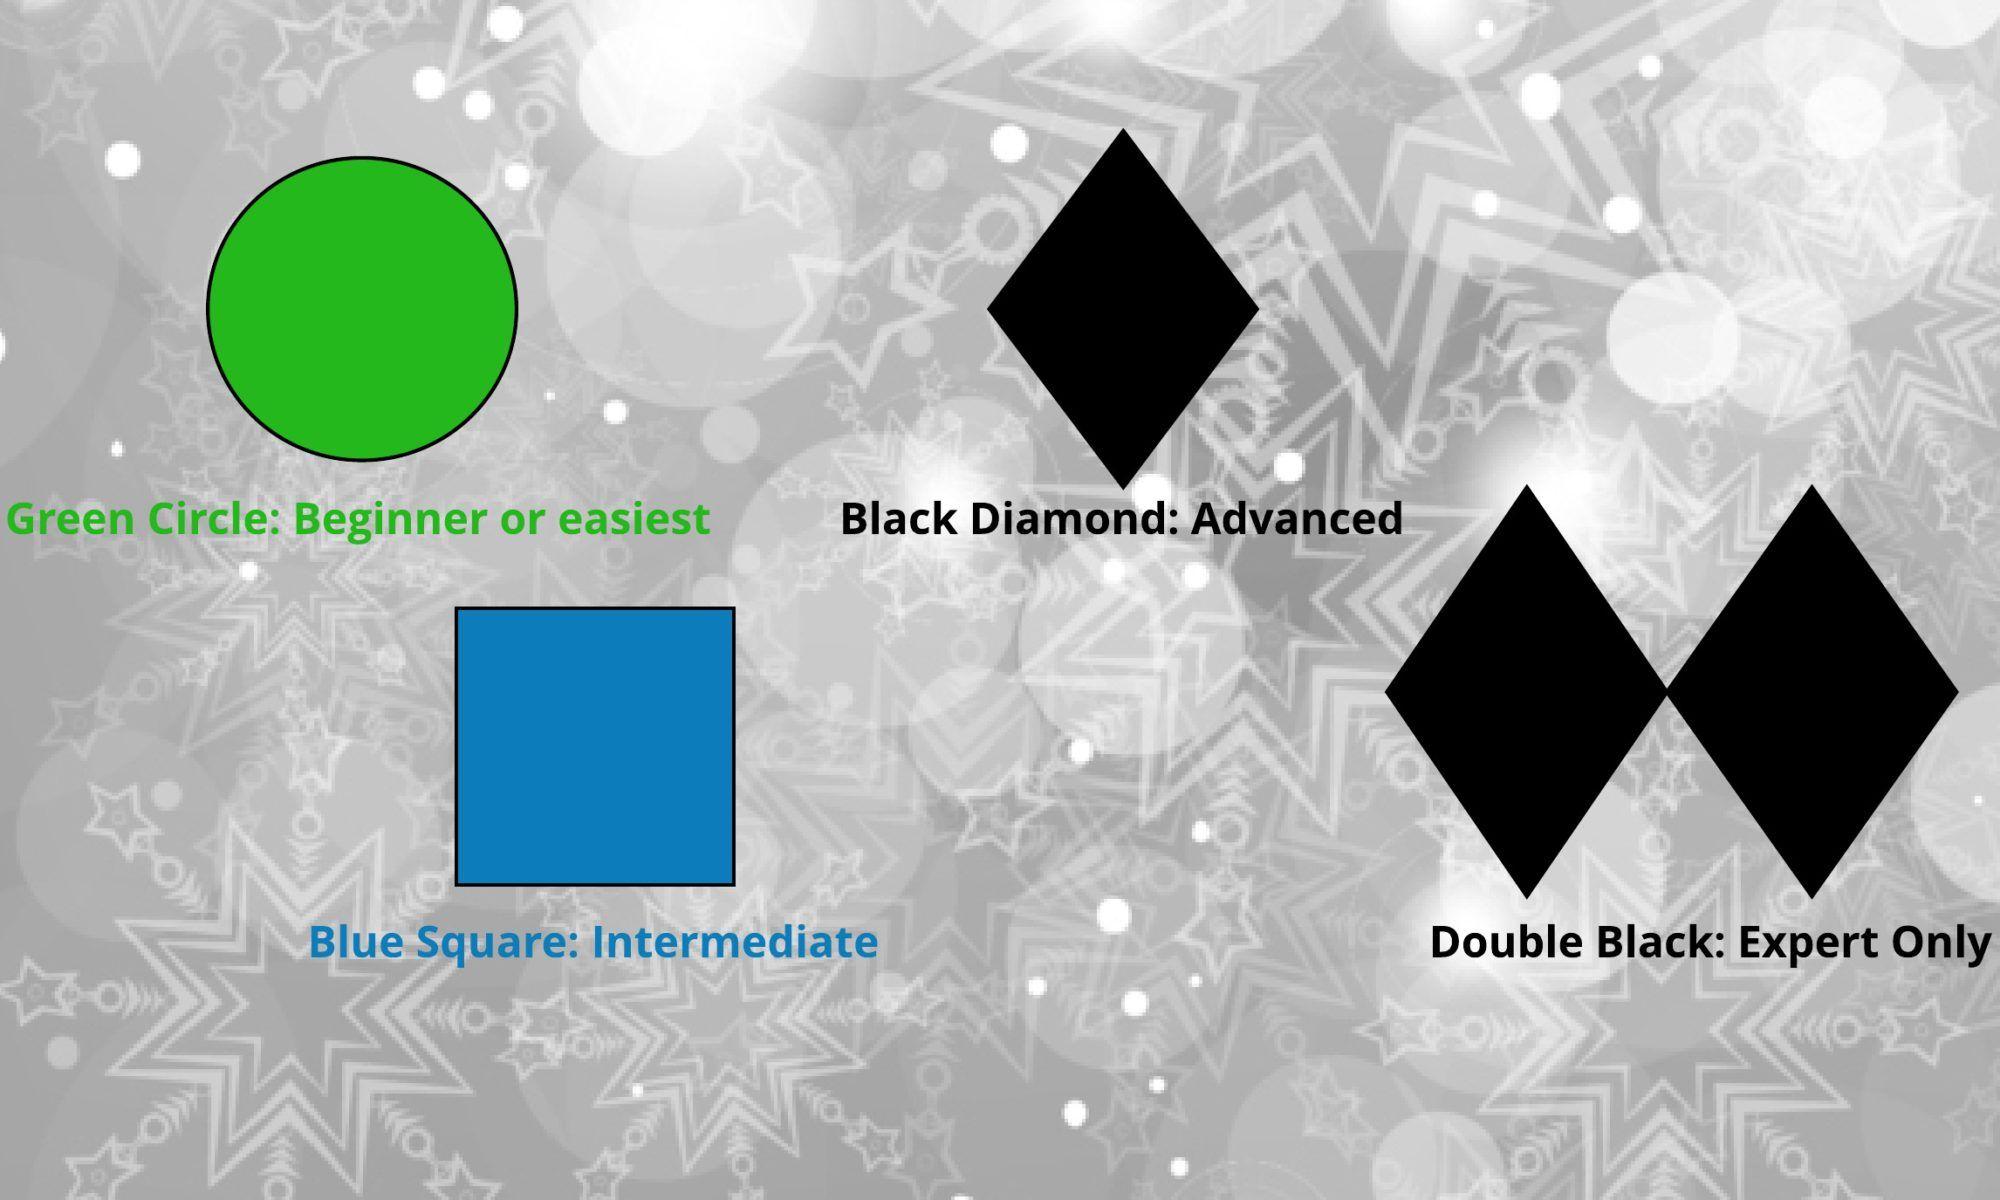 Double Black Diamond Logo - How We Review Local Vail Businesses- Using Ski Run Classifications ...